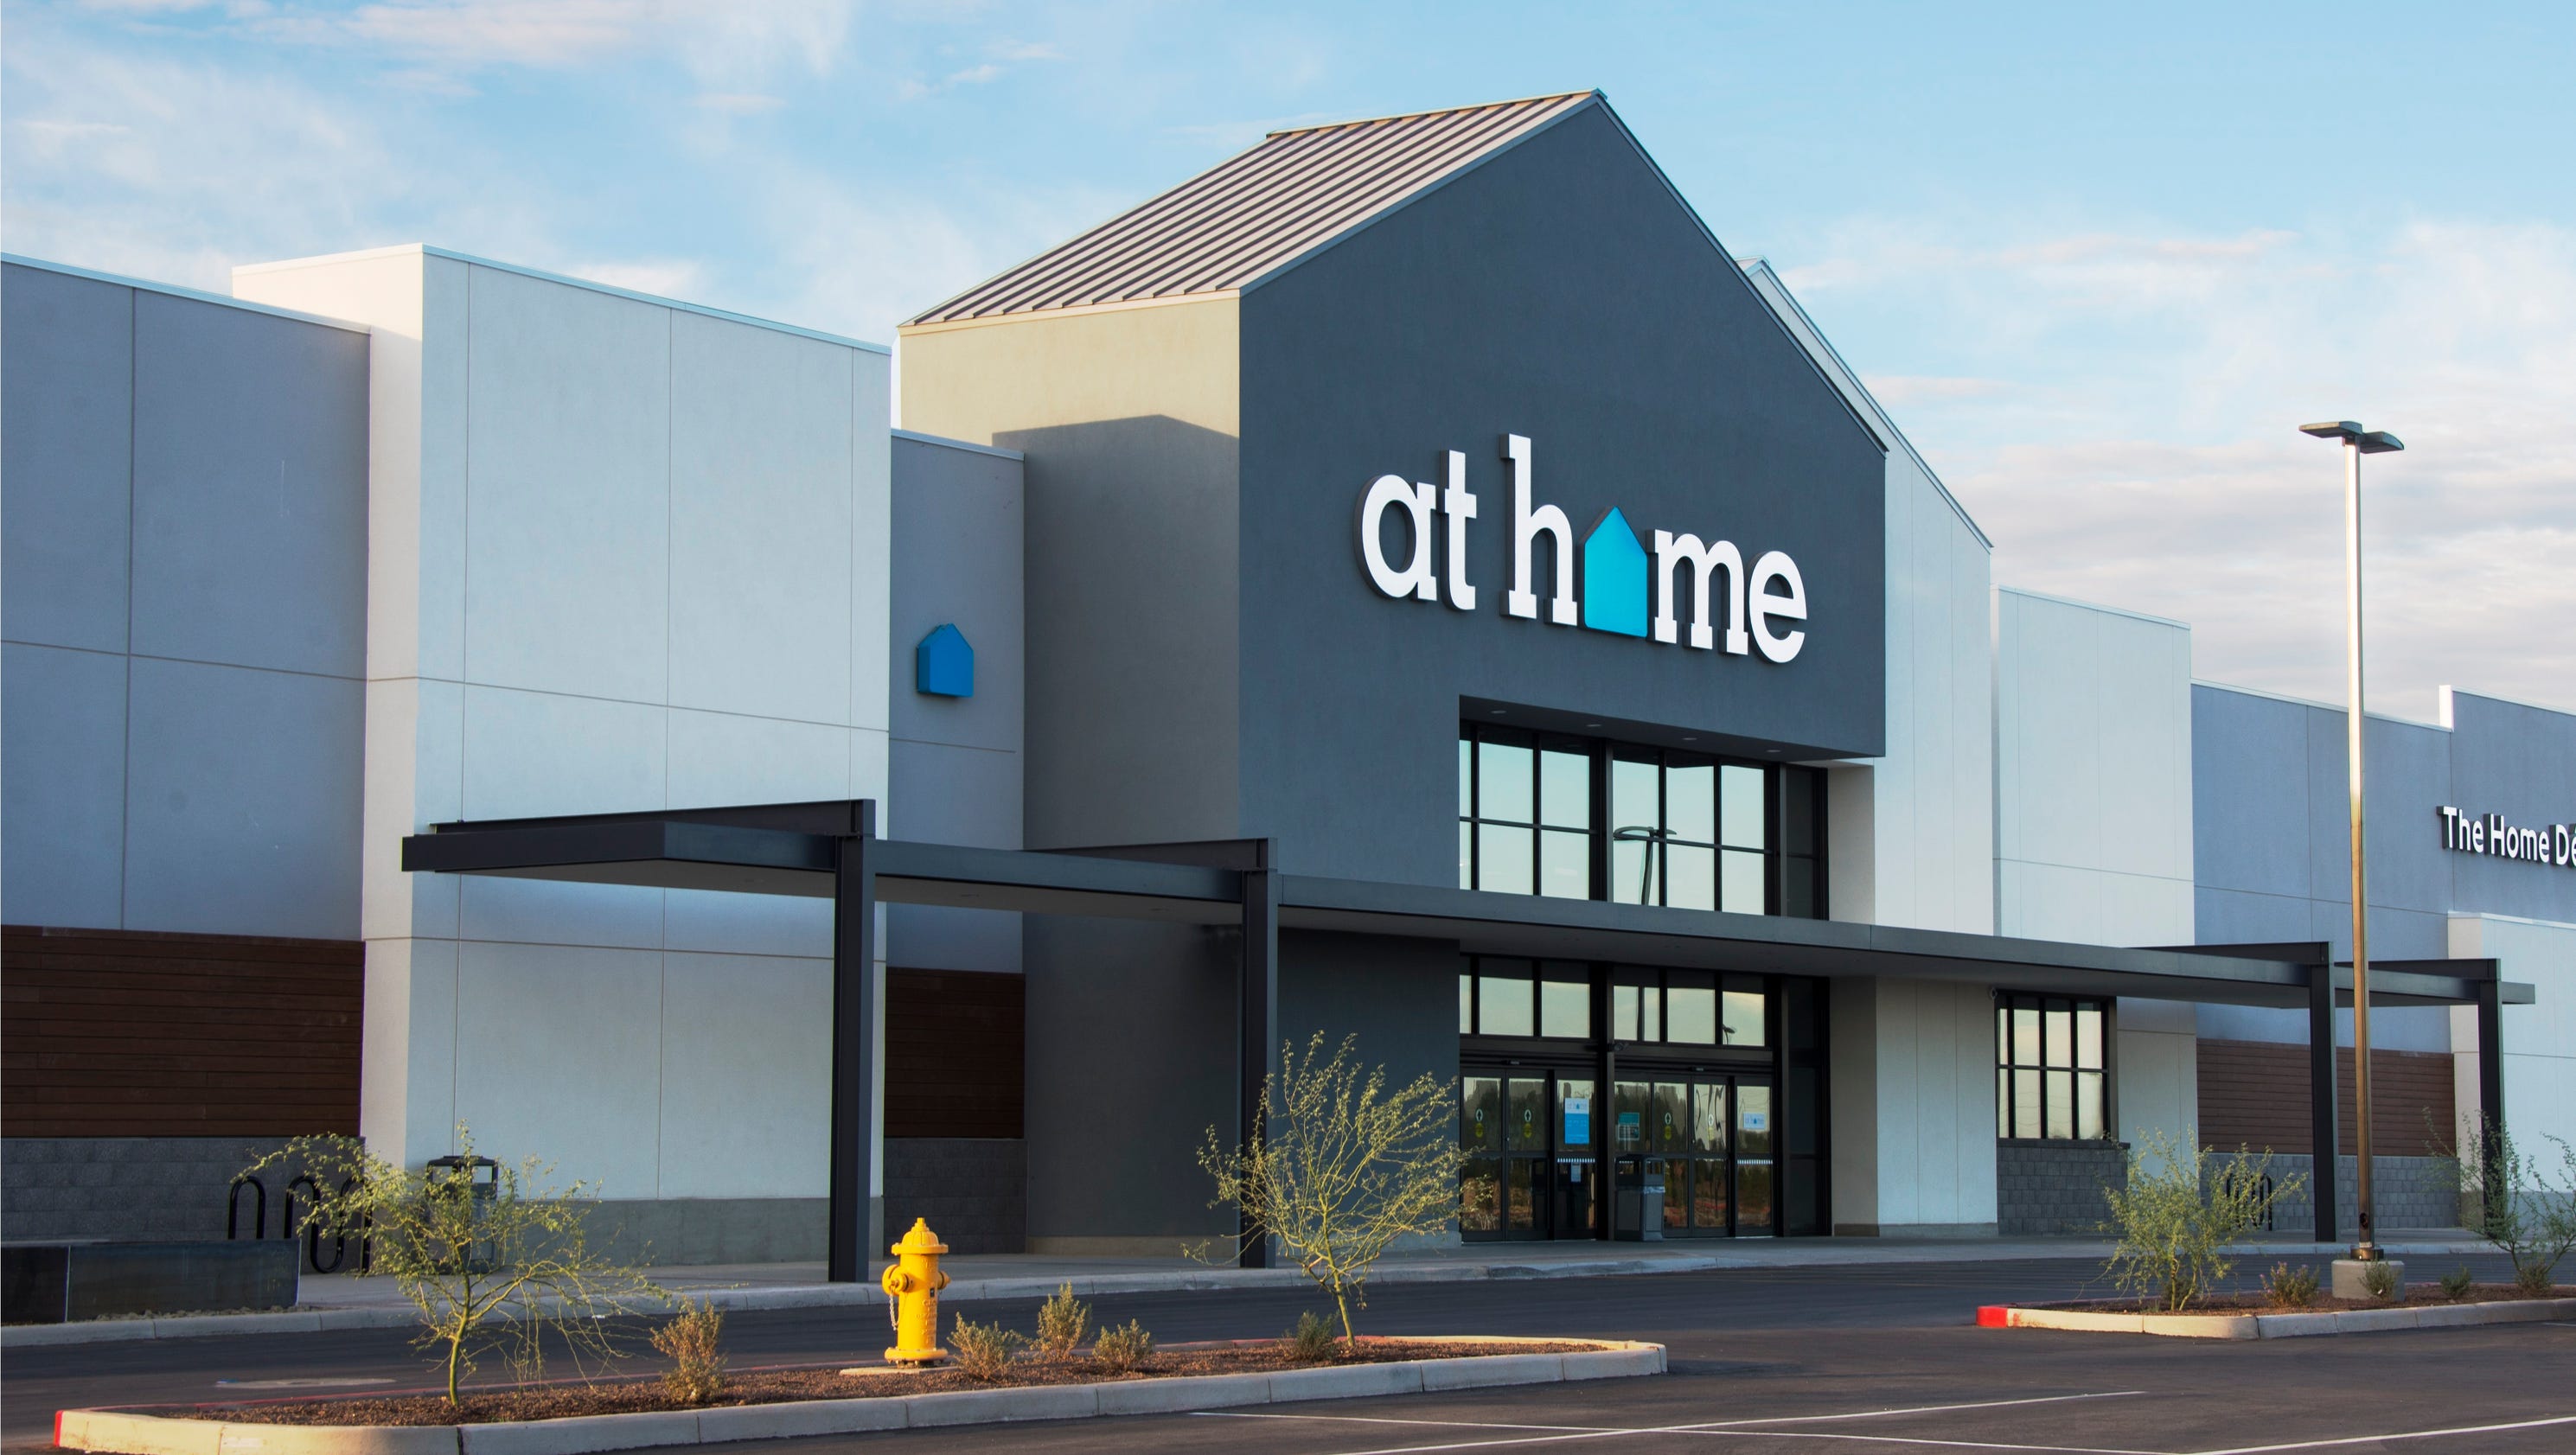 At Home store opens to public in Roseville, Mich.